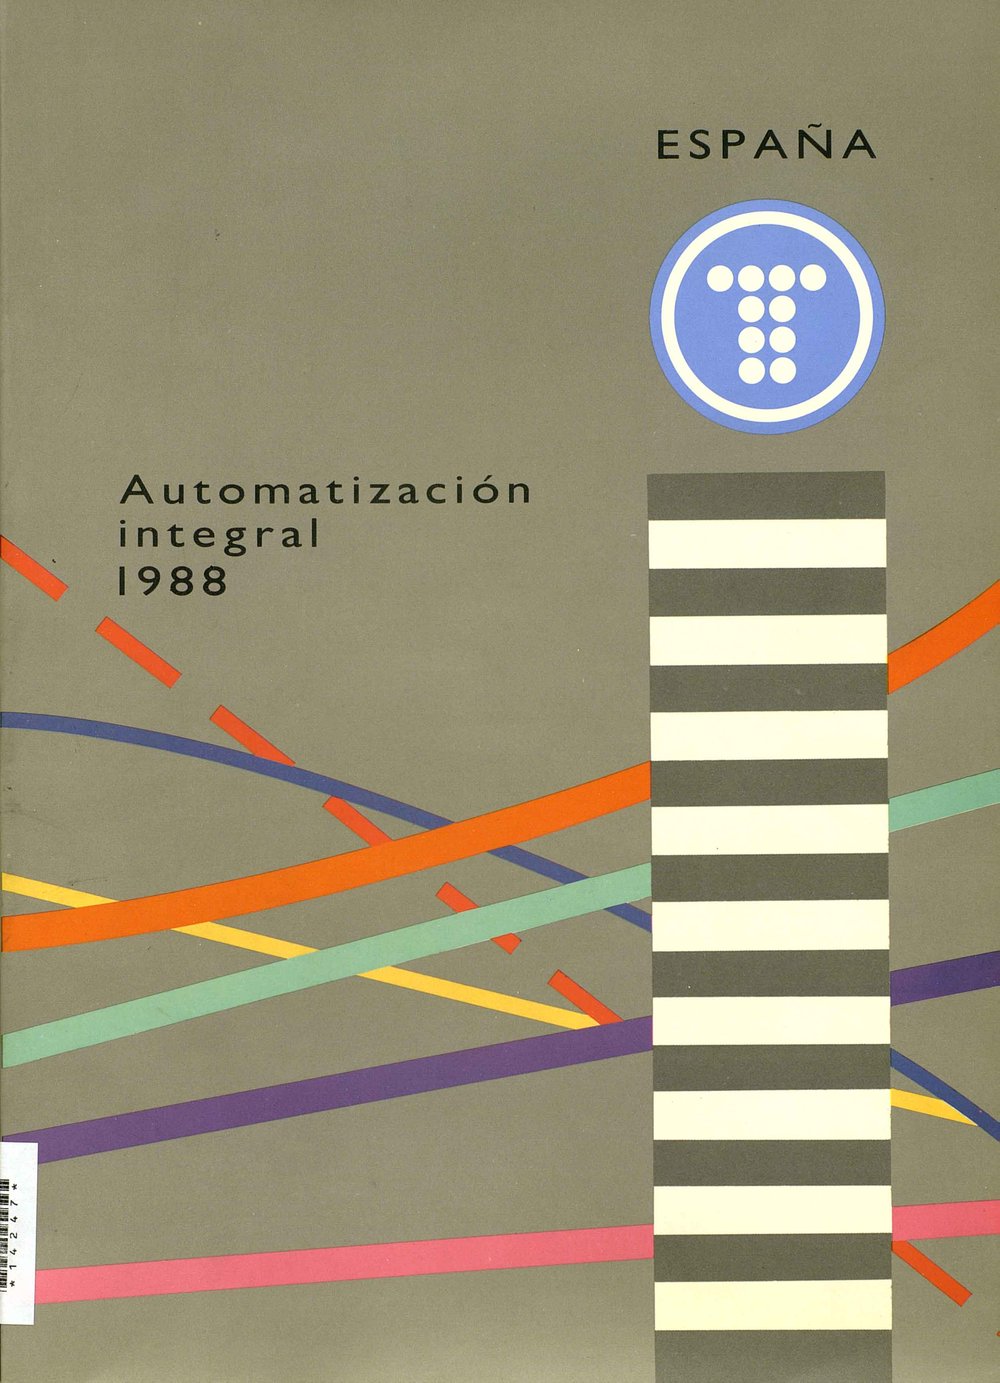 INTEGRAL AUTOMATION 1988 : SPAIN